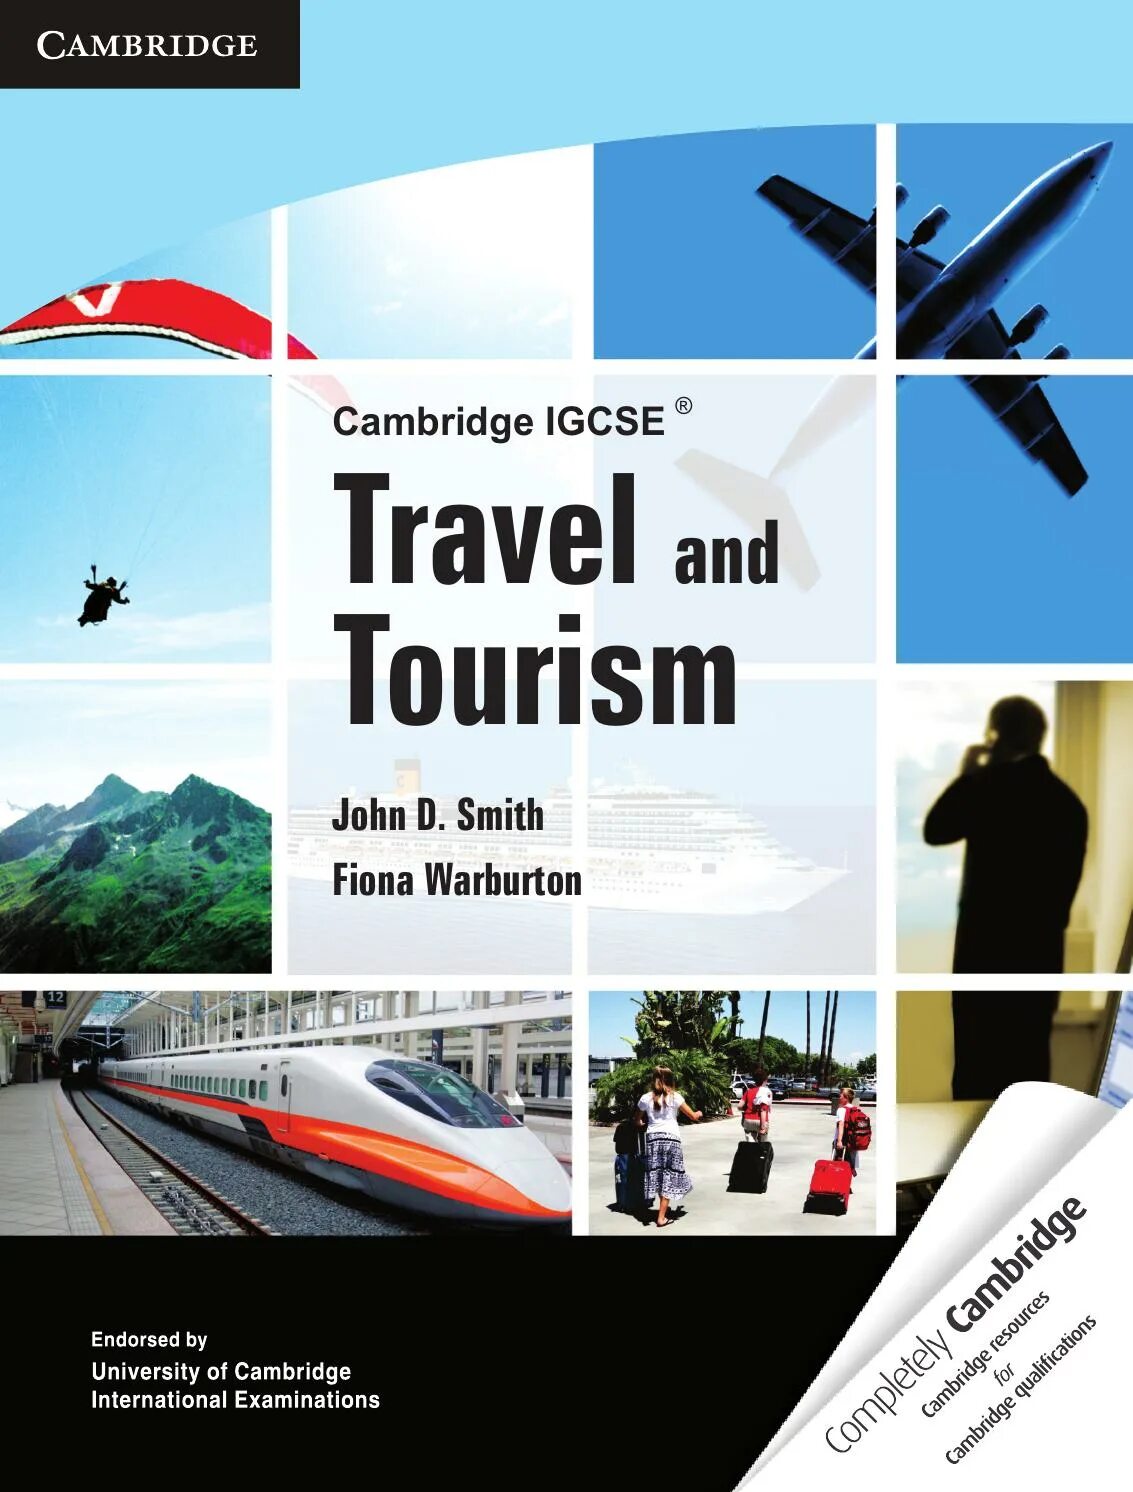 English books for Tourism. Booklet for Tourists. Travel and Tourism учебник для вузов. World Tourism учебник. Tourism book